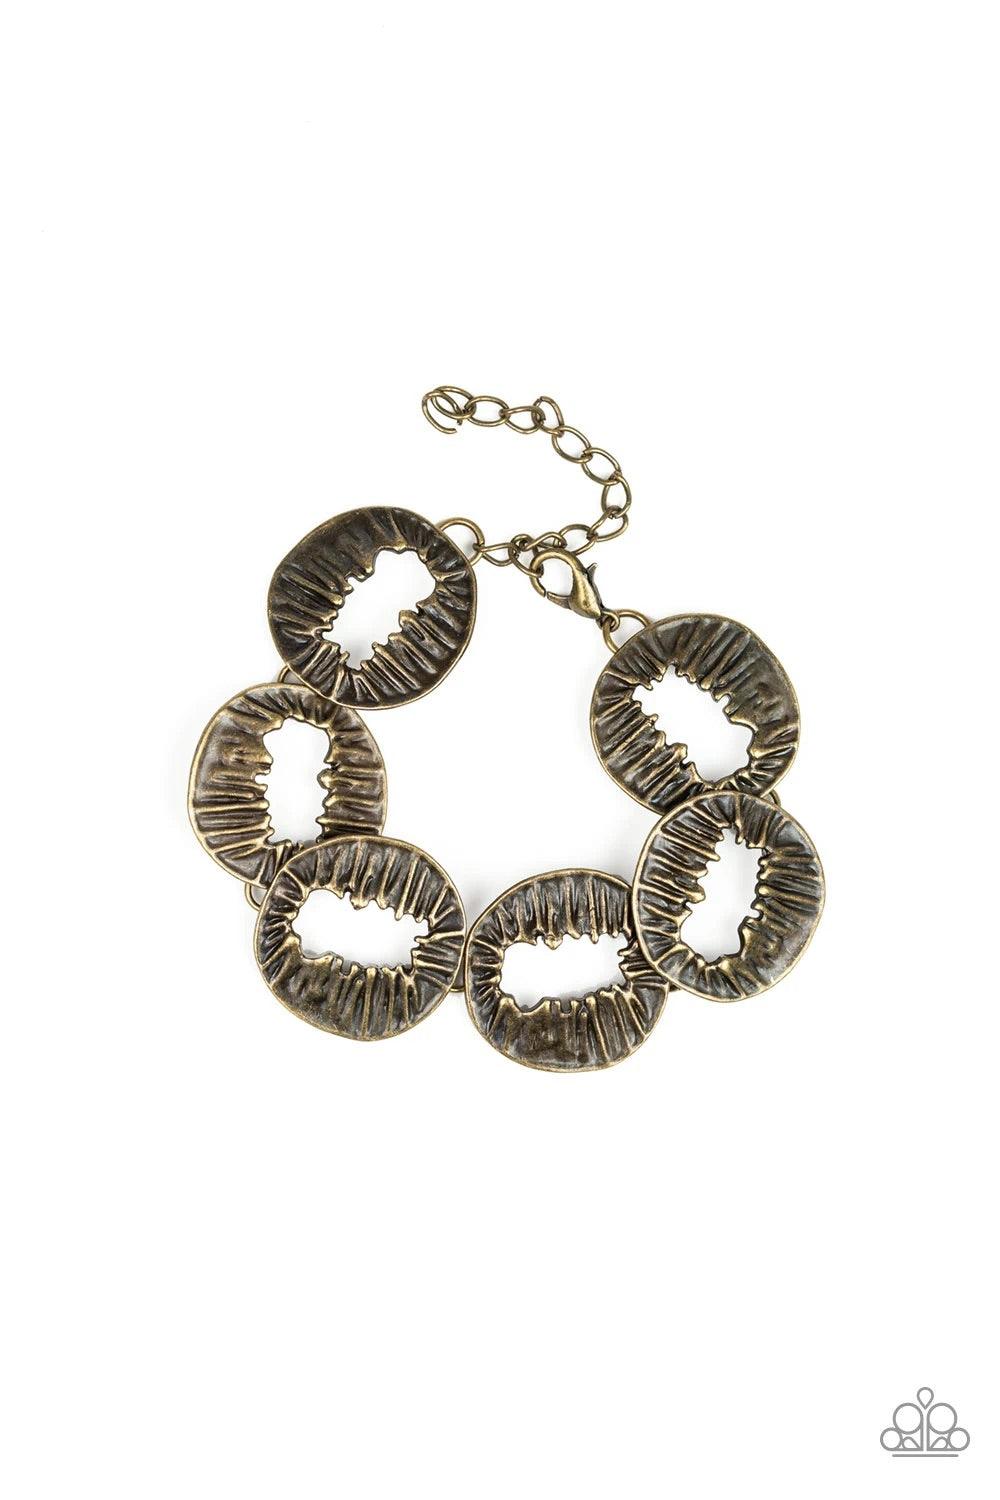 Paparazzi Accessories Cut It Out! - Brass Featuring asymmetrical cutout centers, textured brass discs connect across the wrist for an abstract look. Features an adjustable clasp closure. Sold as one individual bracelet. Jewelry